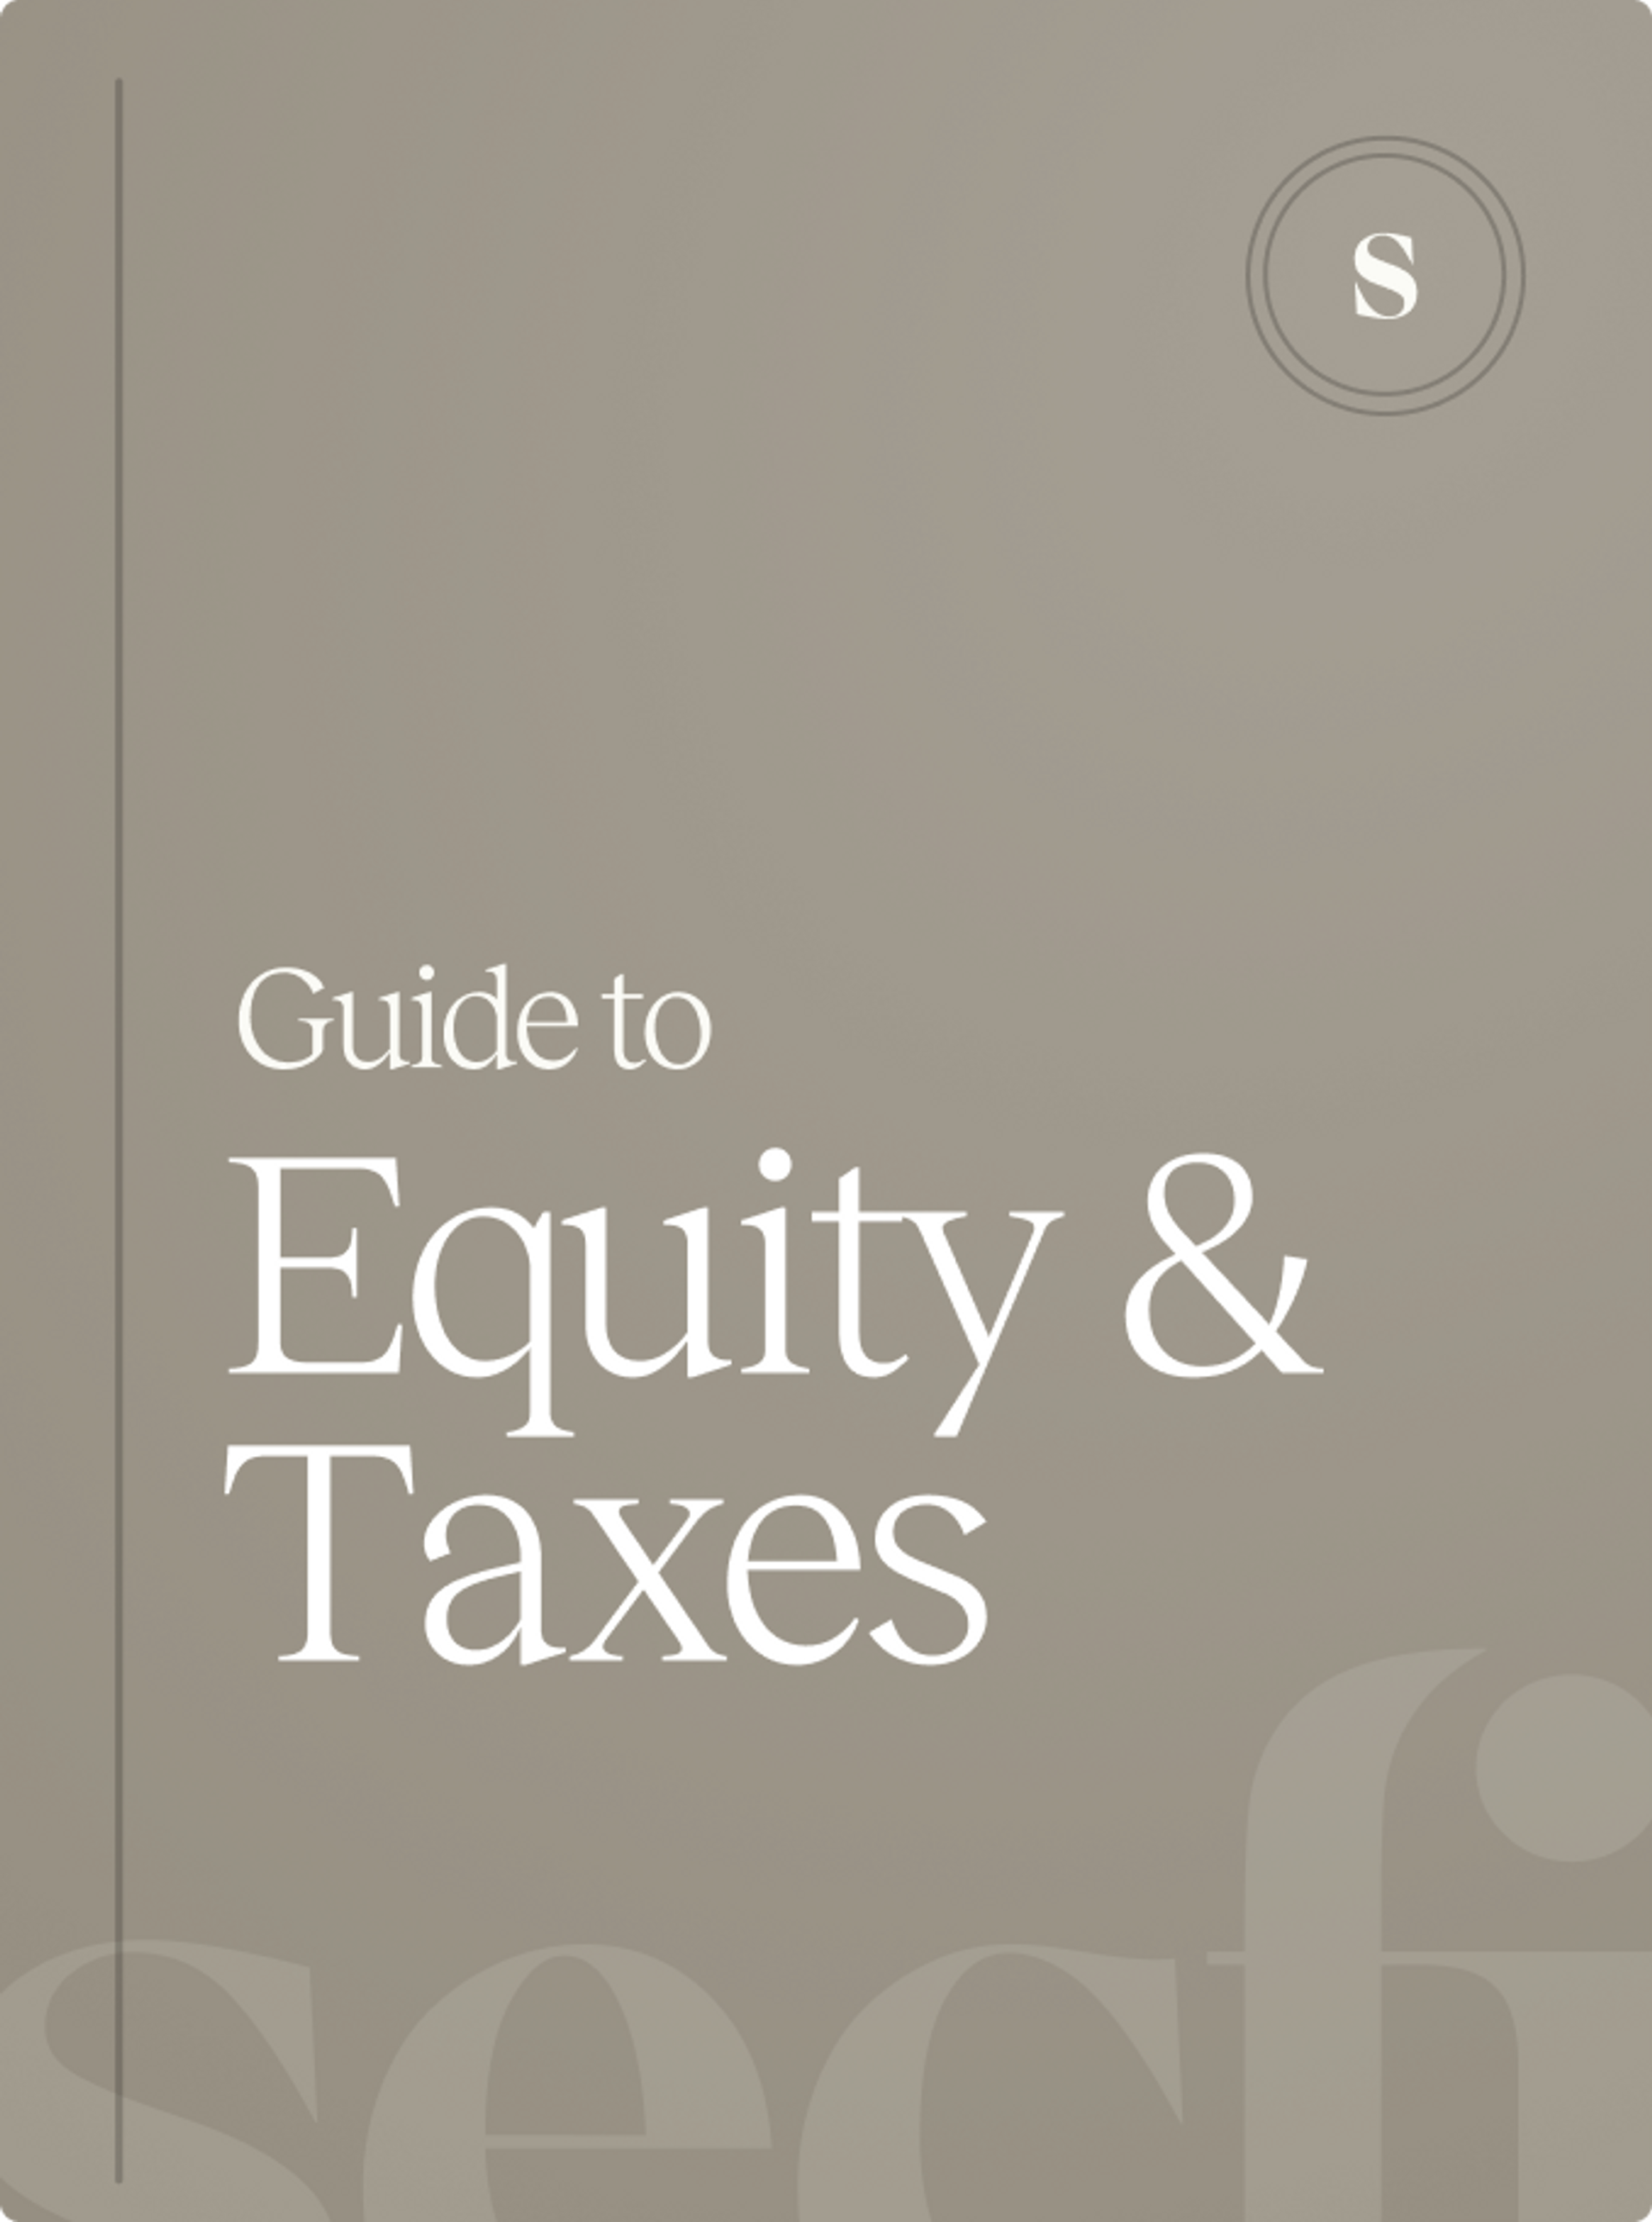 The complete guide to equity and taxes